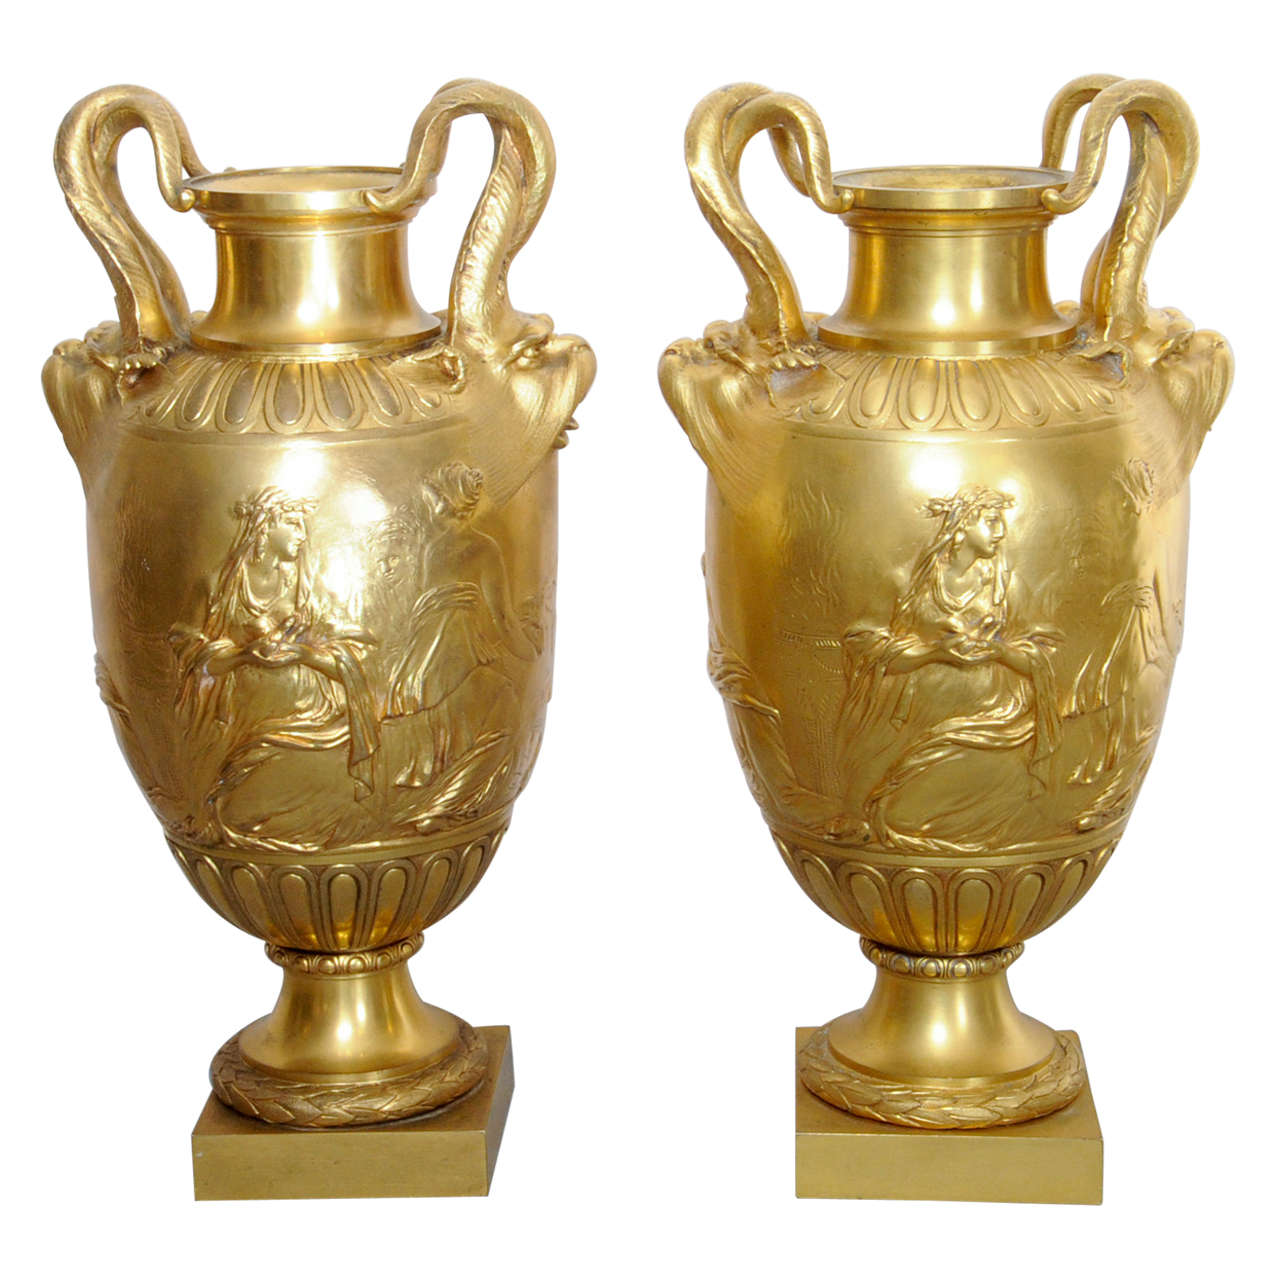 A Pair of French 19th Century Ormolu Ornamental Vases For Sale